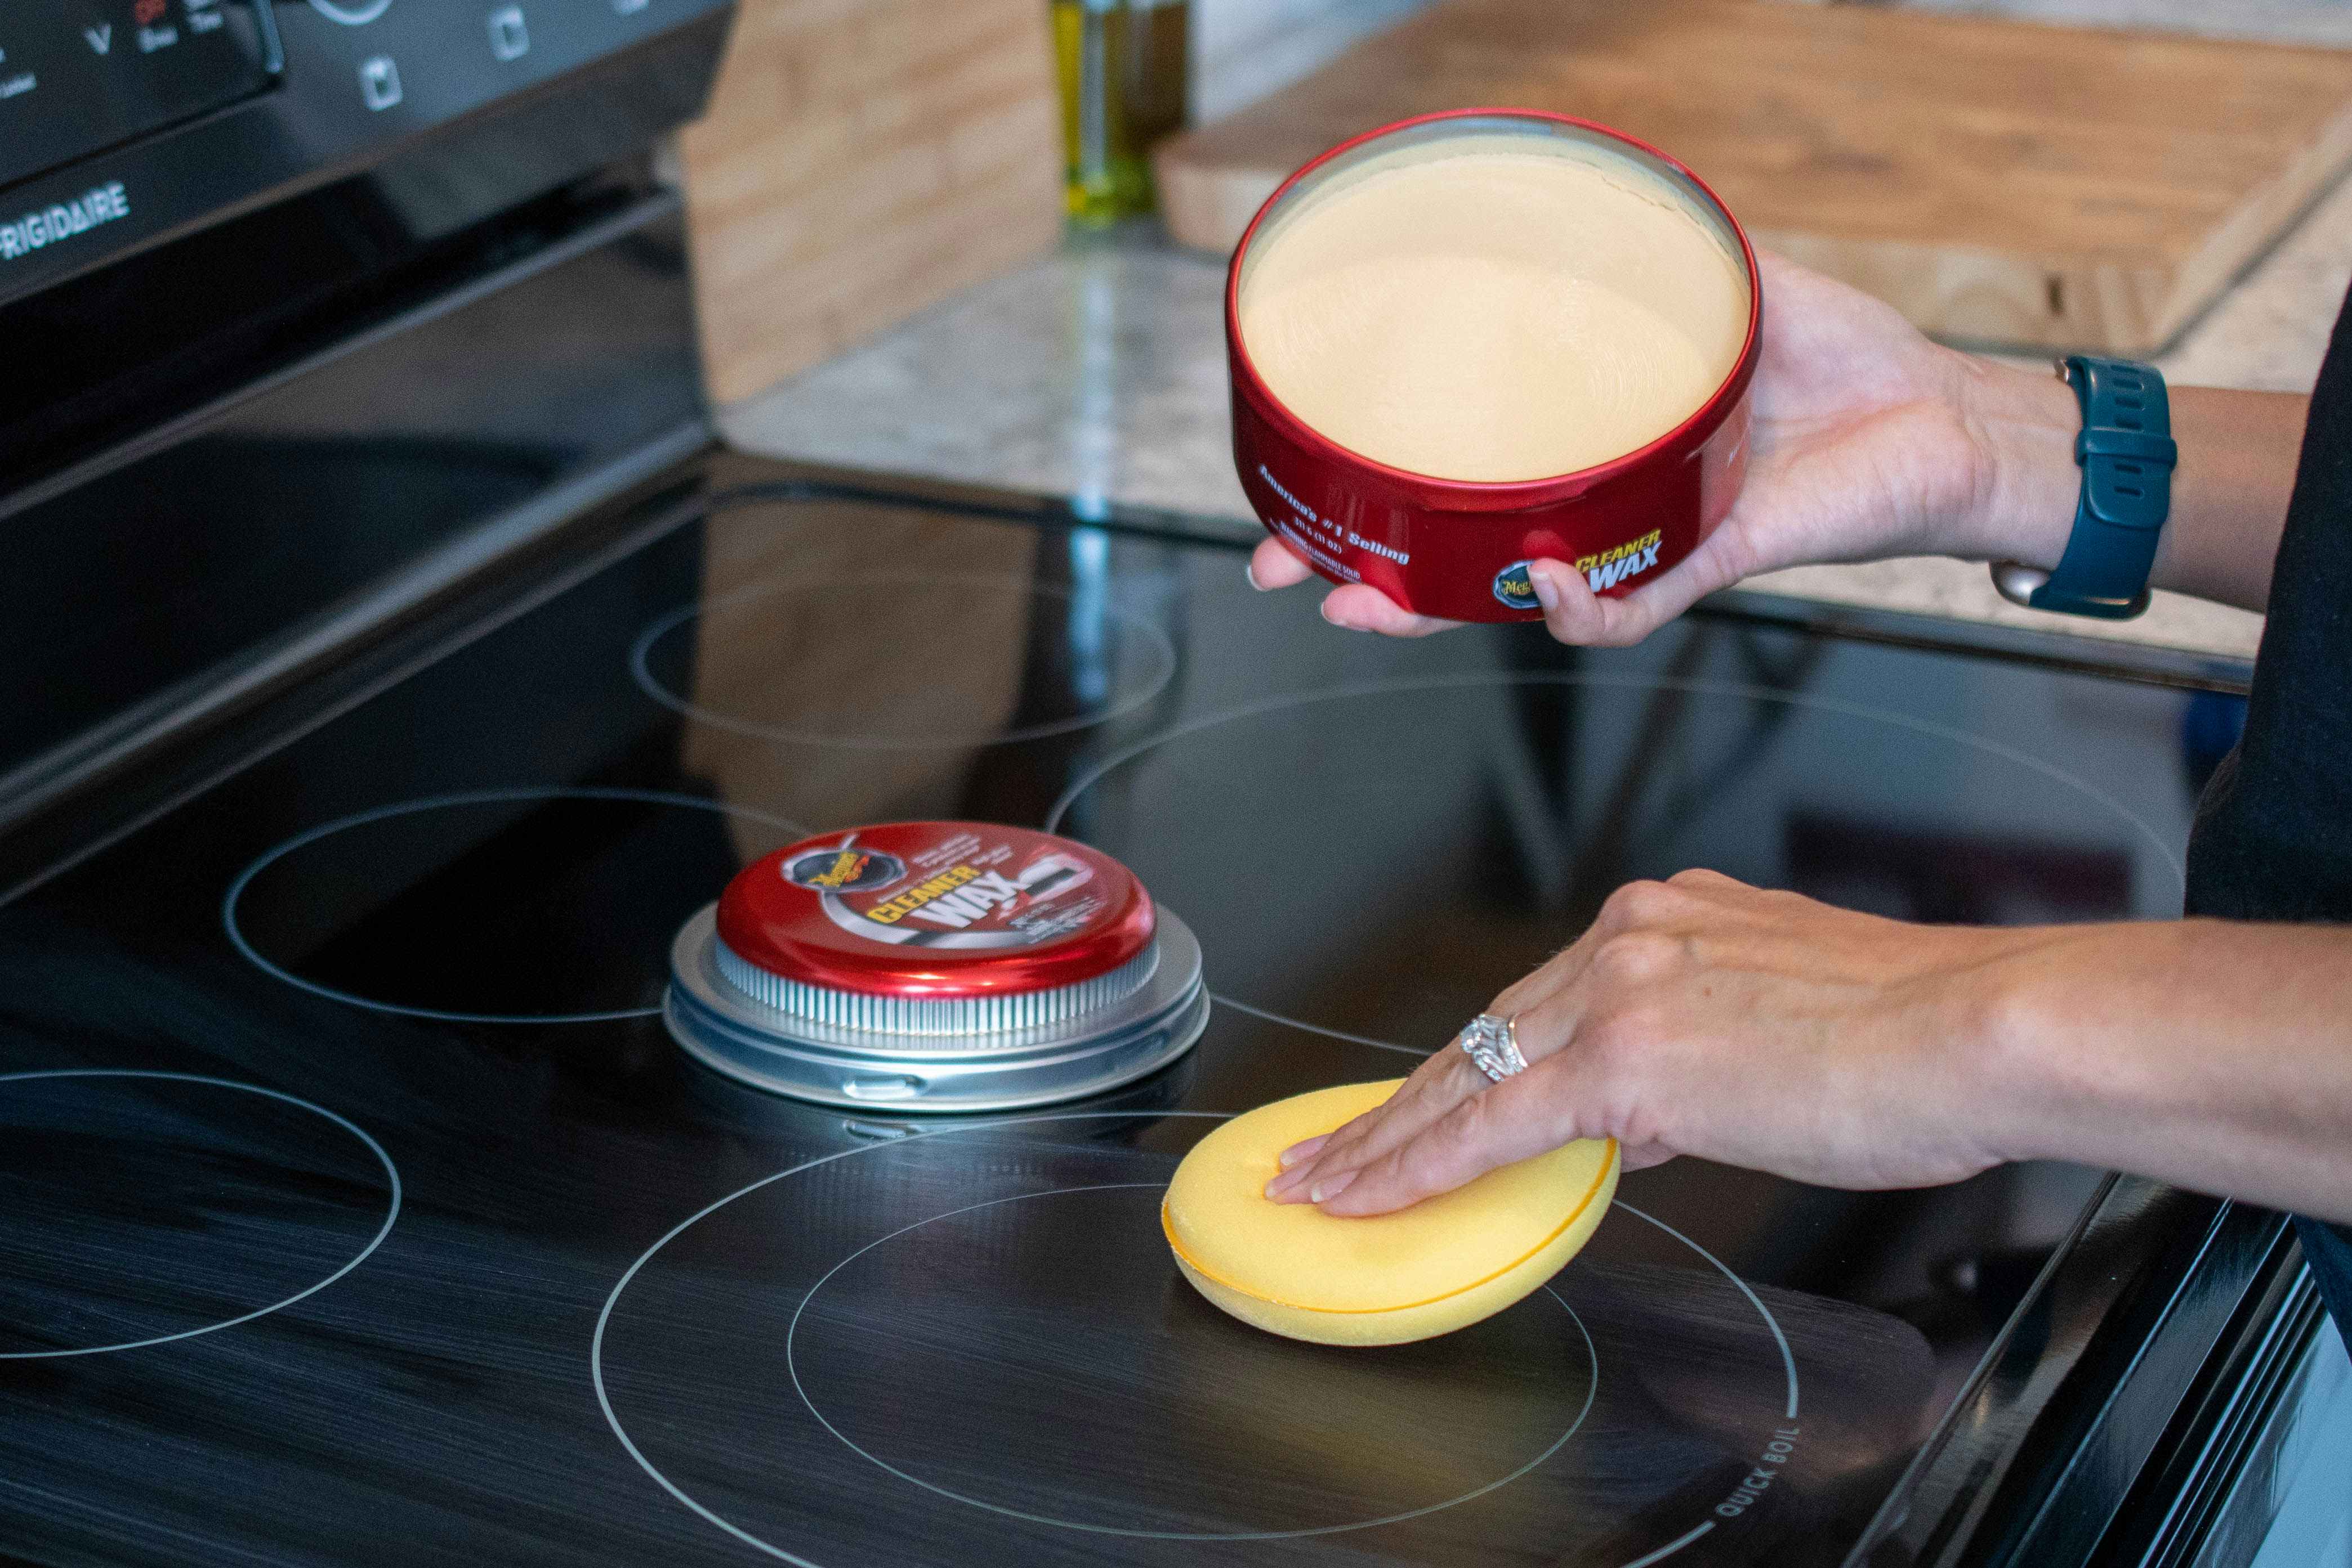 A glass cooktop stove being polished with Car Wax